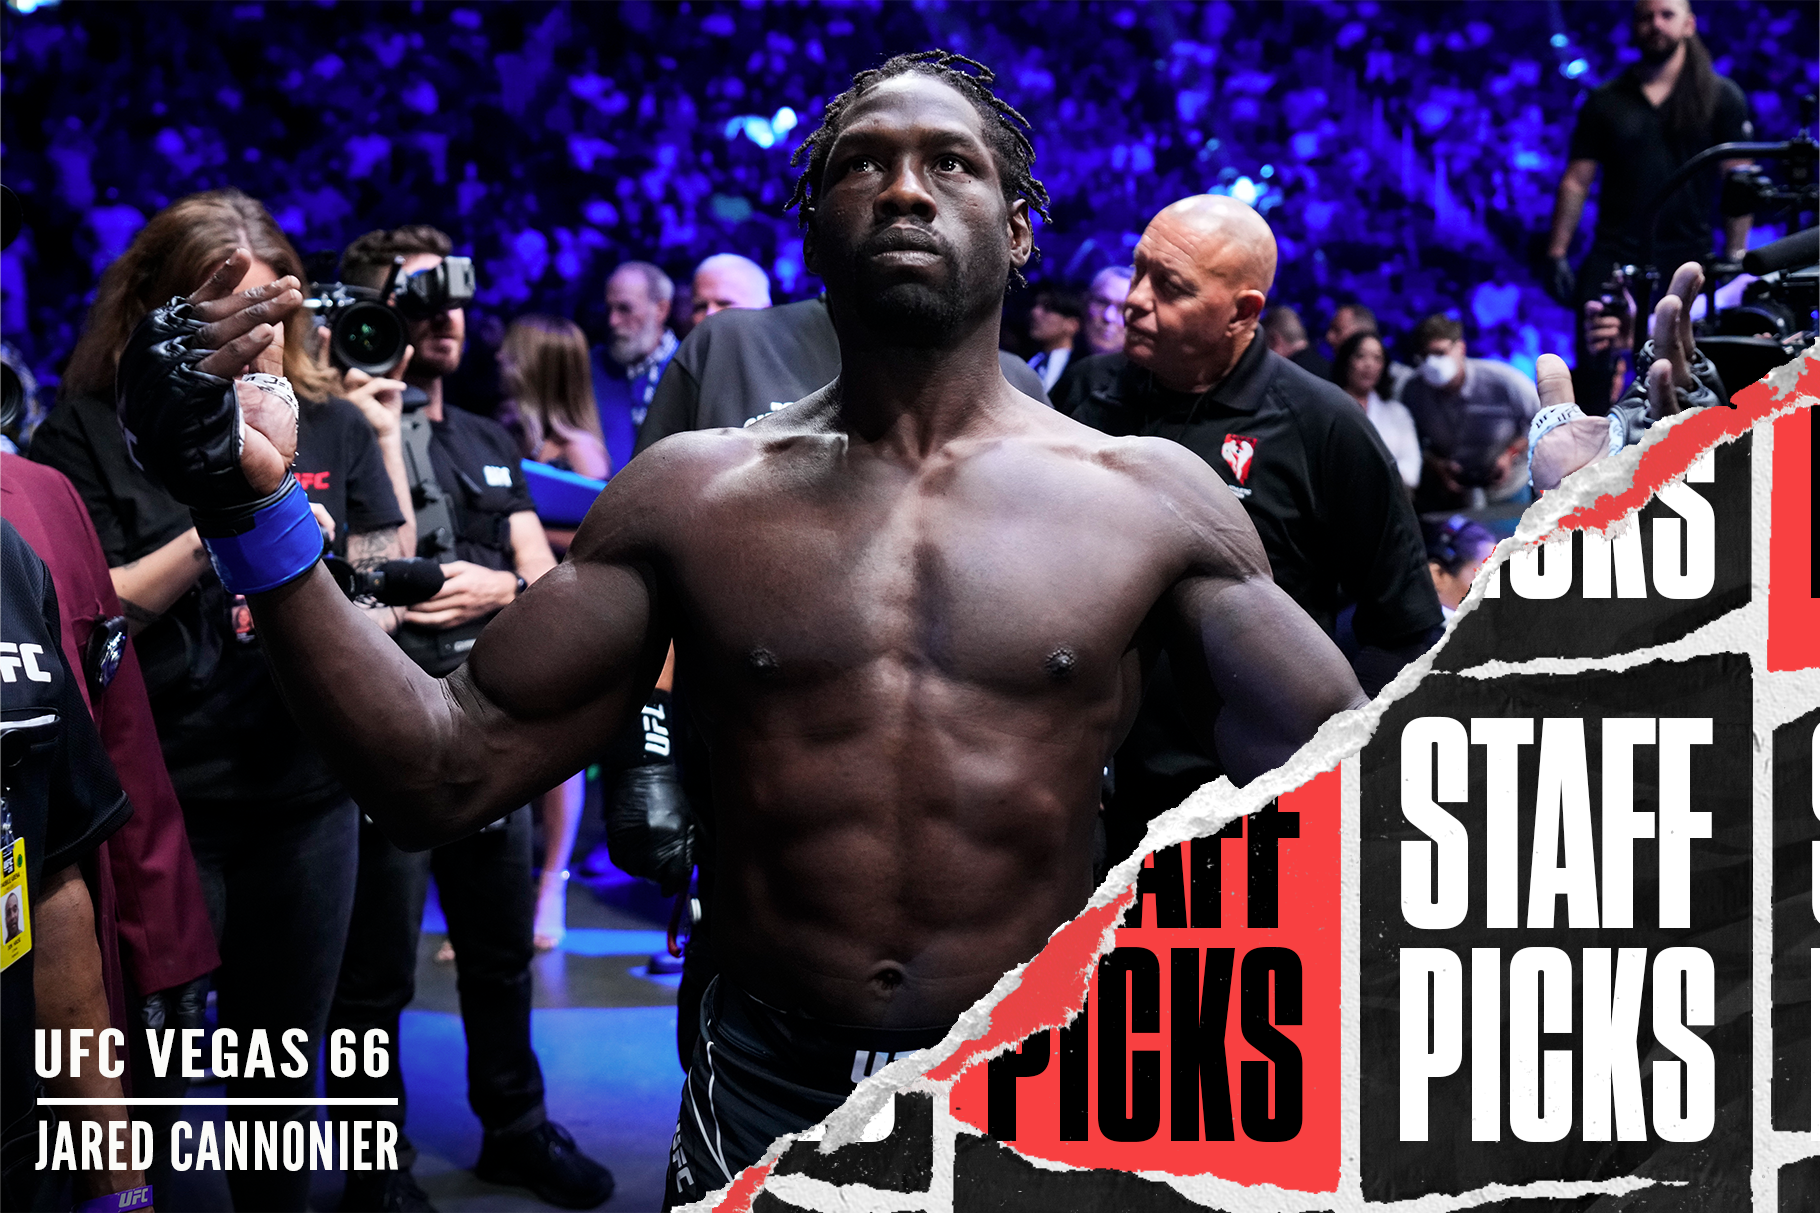 UFC Vegas 66, Bloody Elbow Staff Picks and Predictions, Jared Cannonier vs Sean Strickland, Jared Cannonier at UFC 276, UFC Fight Night,